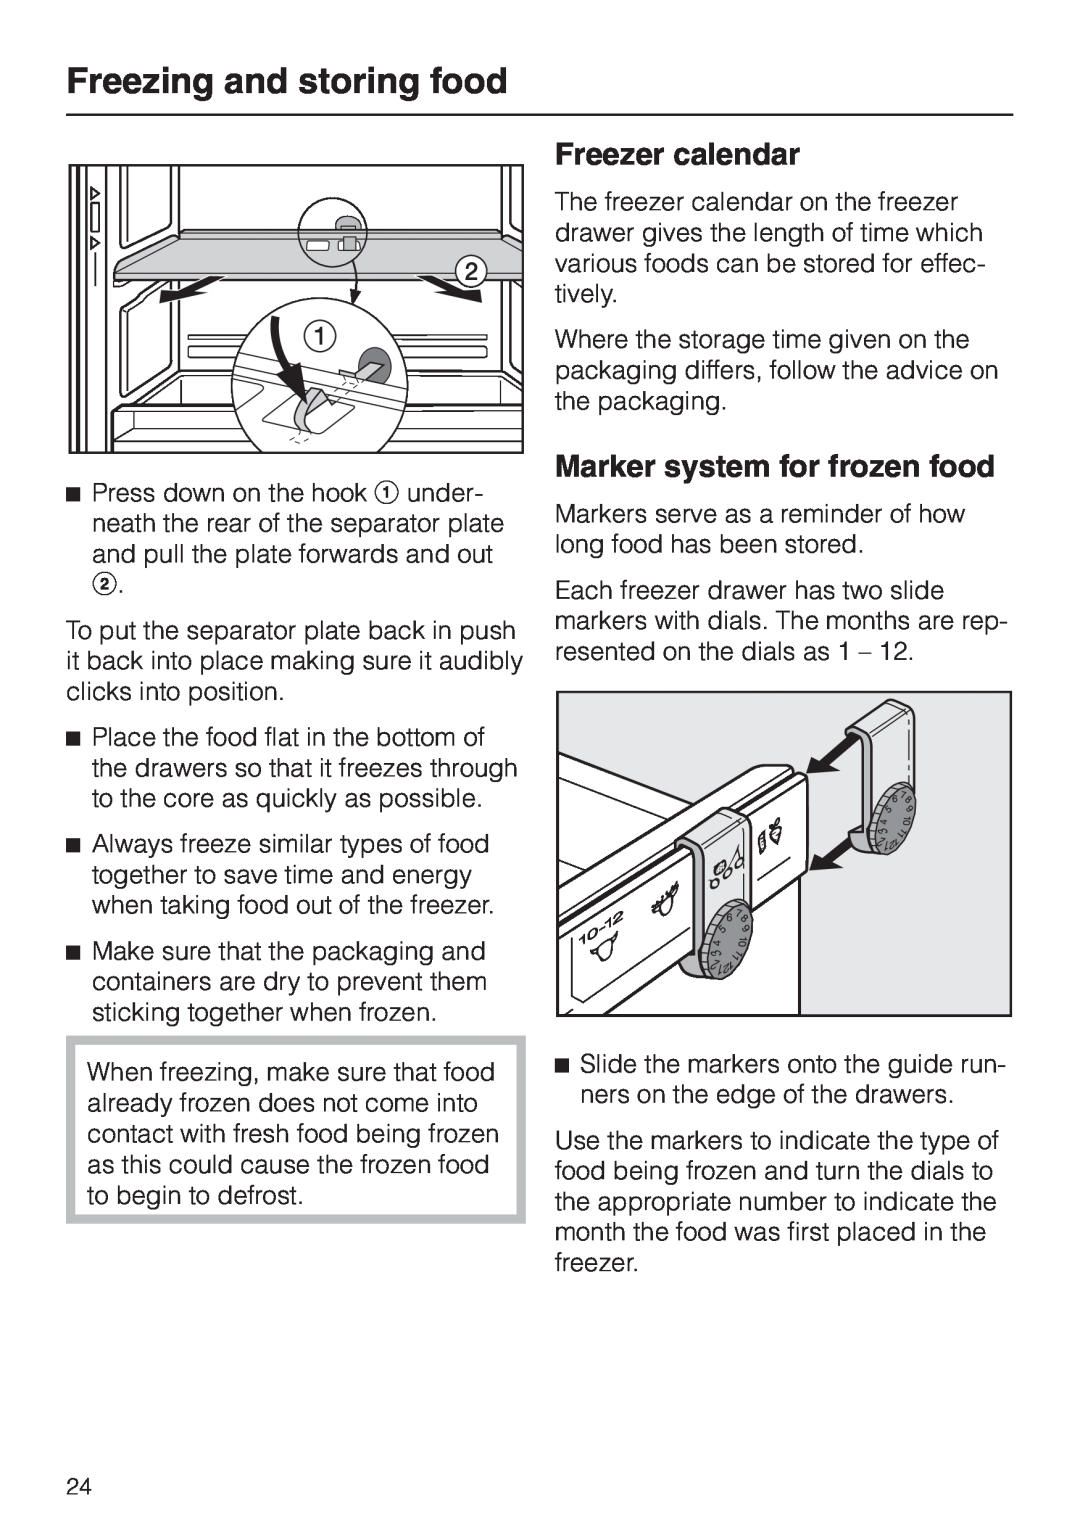 Miele KF 7544 installation instructions Freezer calendar, Marker system for frozen food, Freezing and storing food 